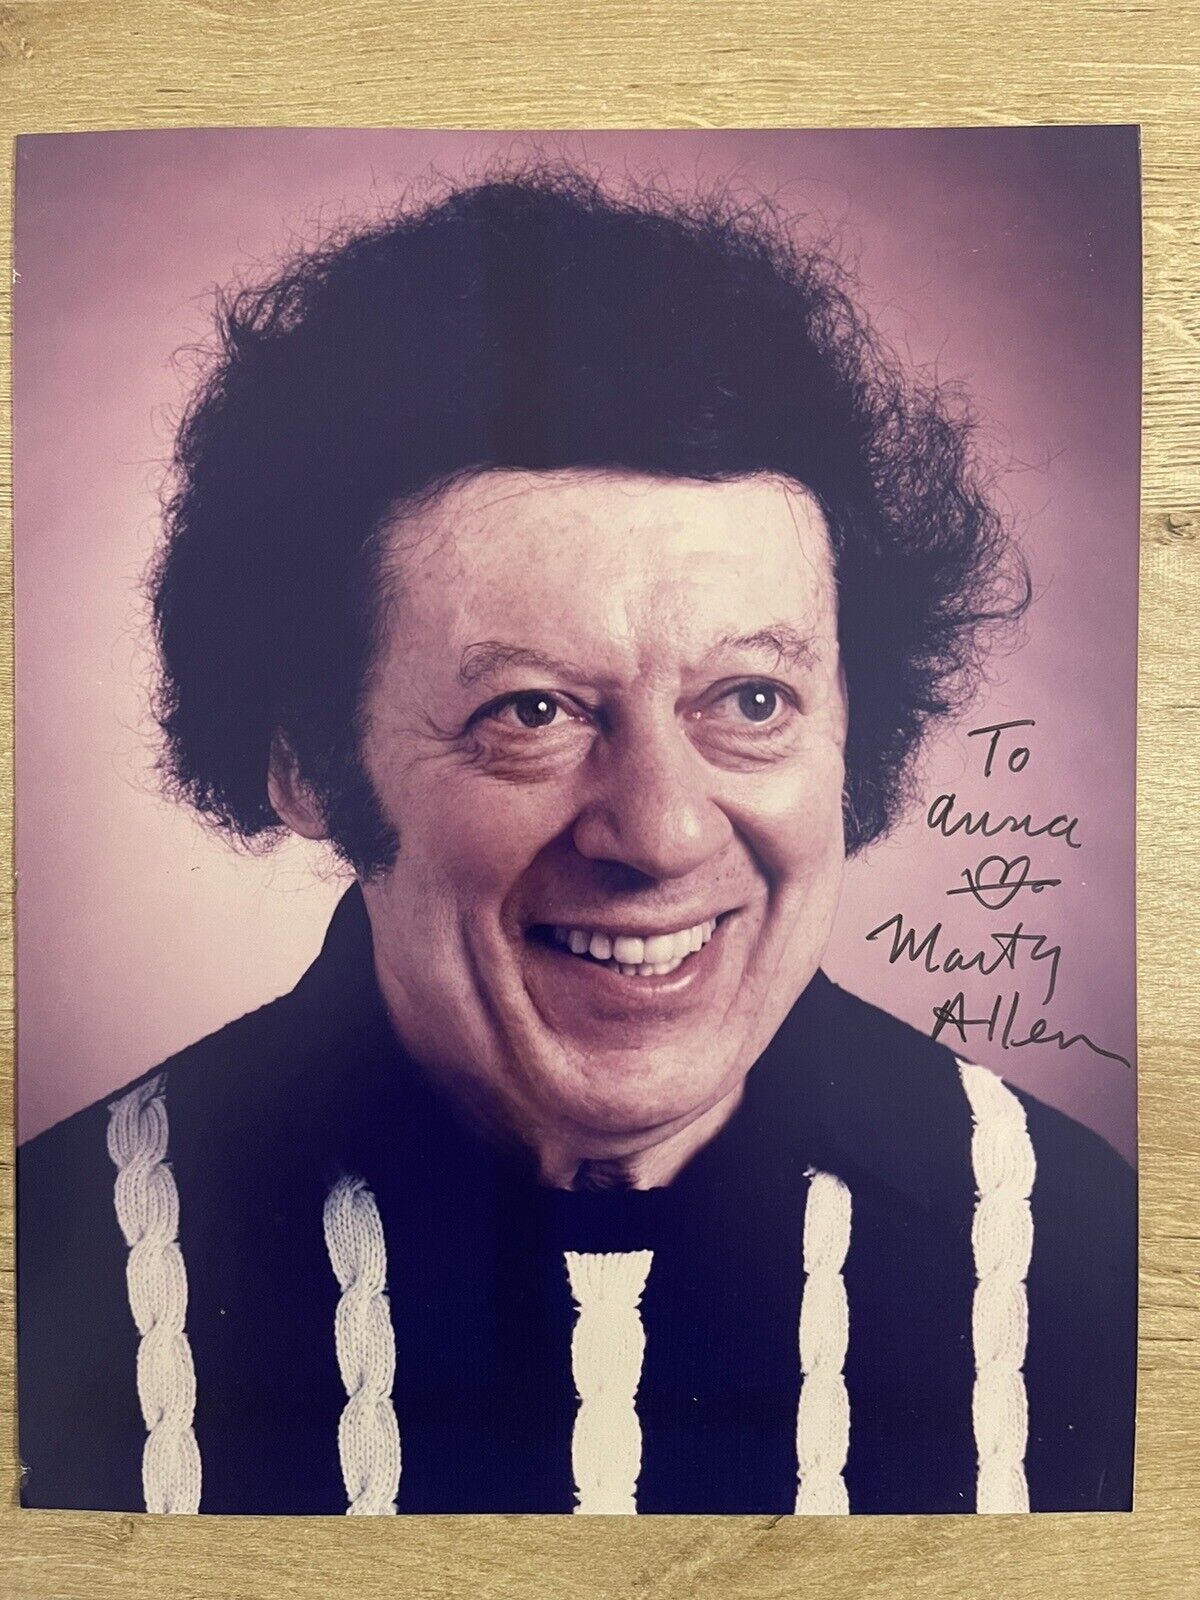 Marty Allen Signed Photo - 8 x 10 Autographed Picture